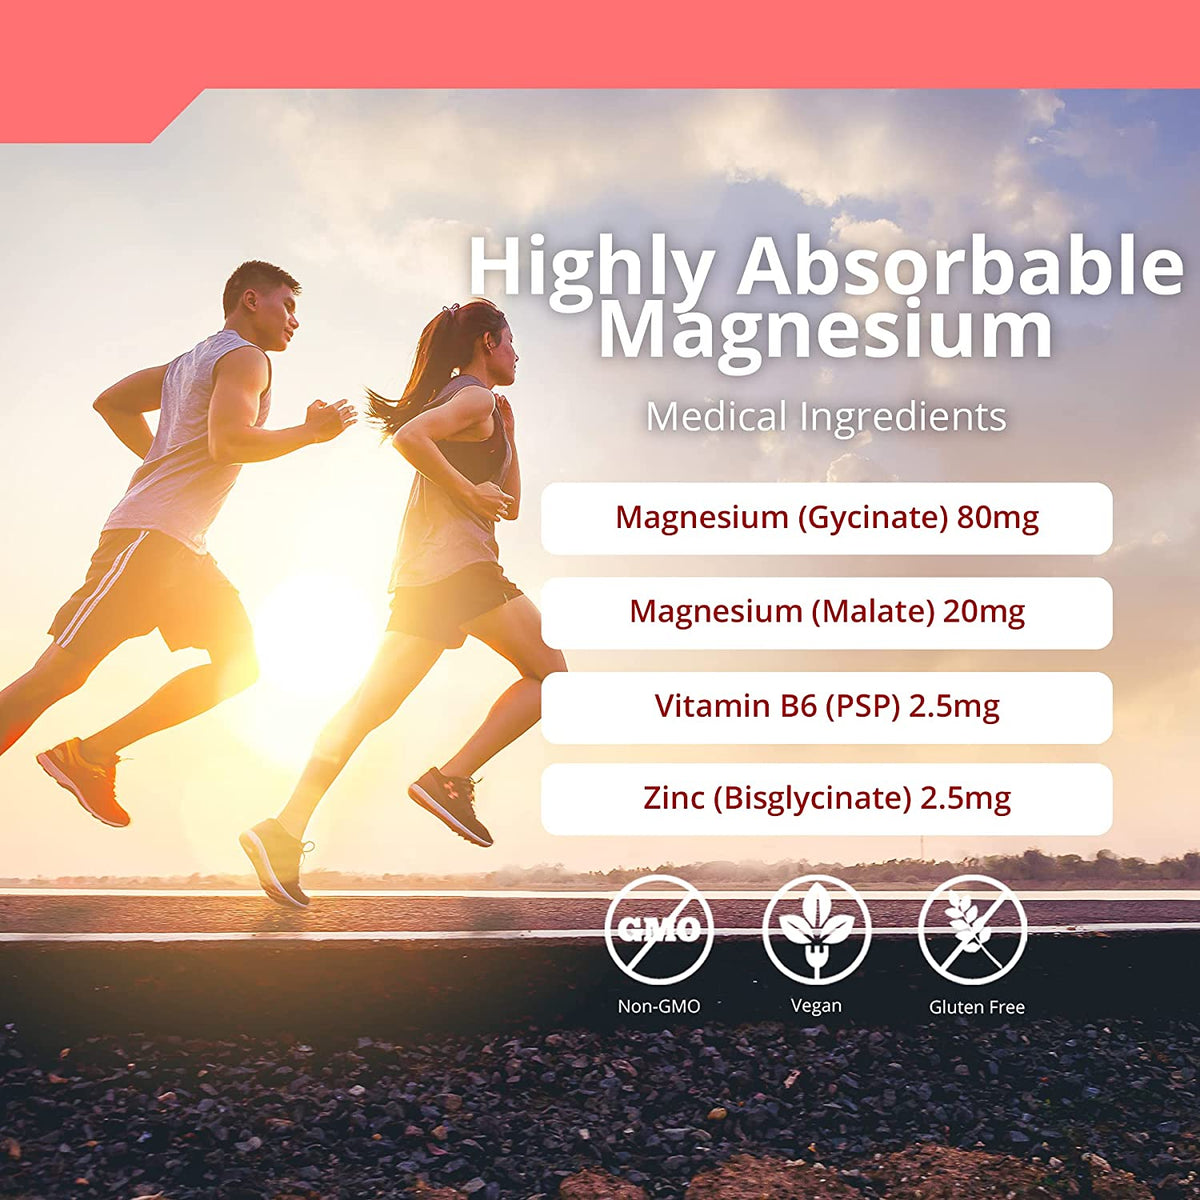 Magnesium Balance (120) - Highly Absorbable Magnesium with Vitamin B6 &amp; Zinc